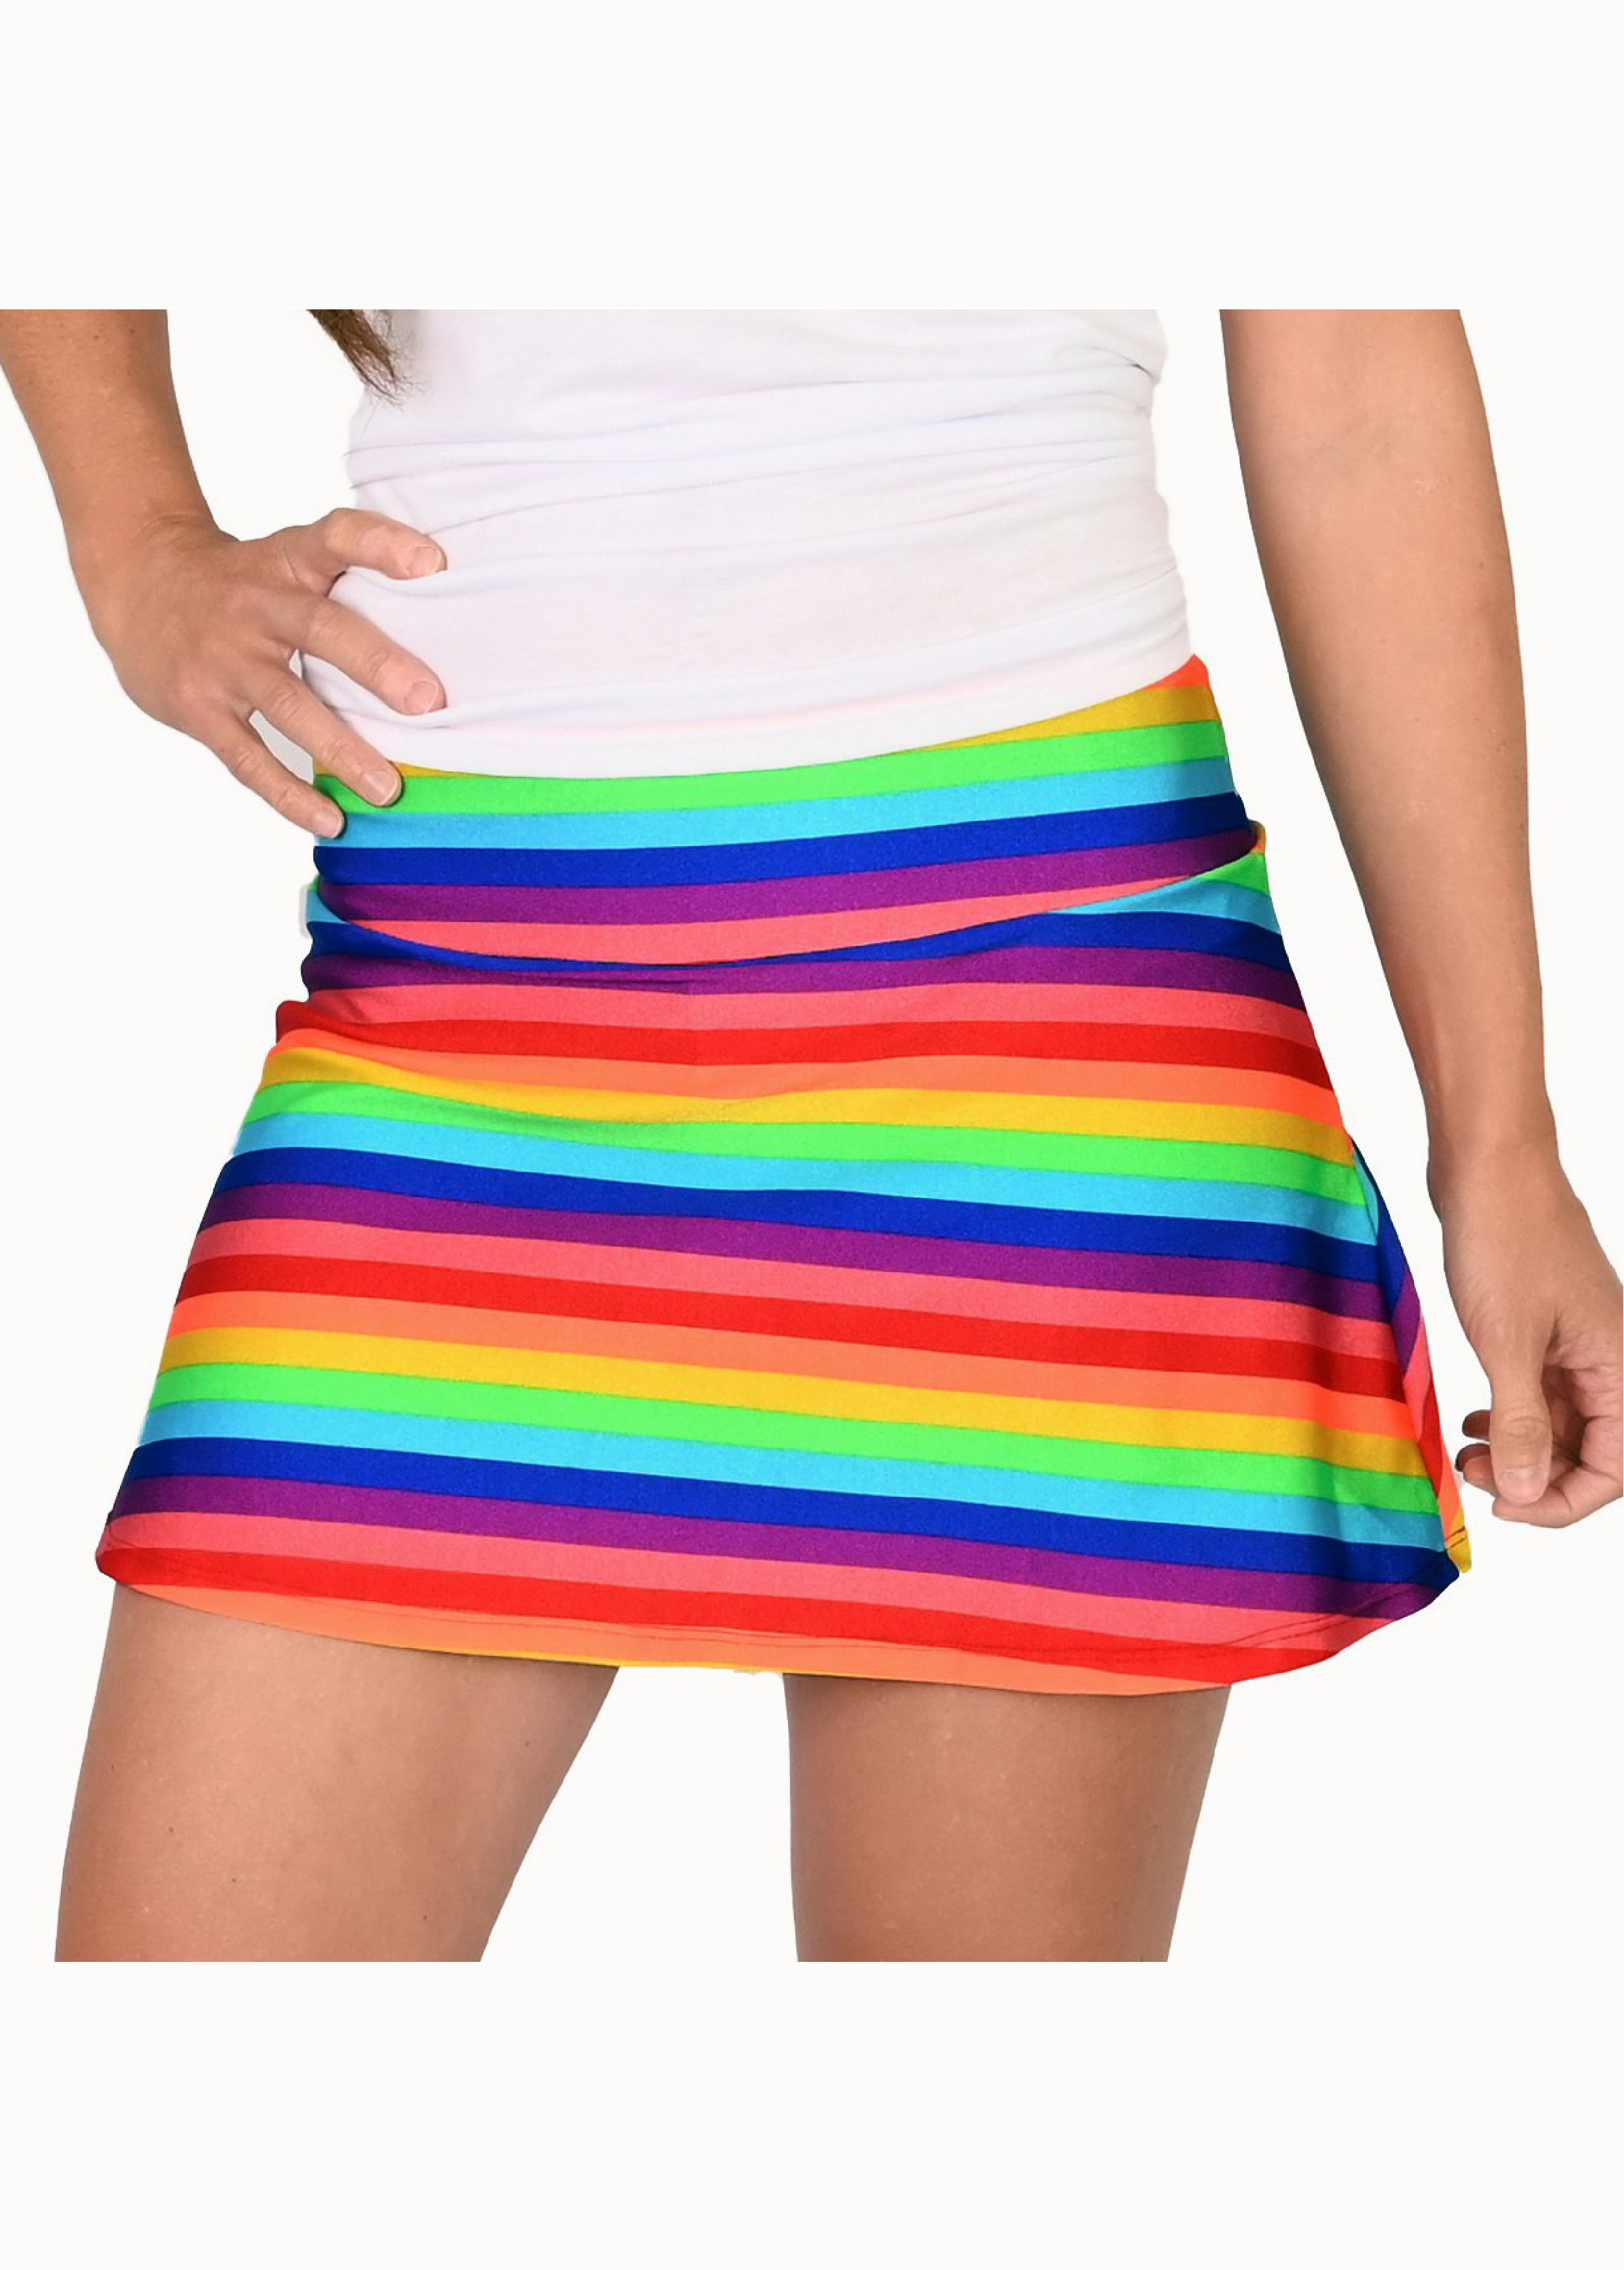 Rainbow Love is Everything Tennis Skirt with Blue Shorts